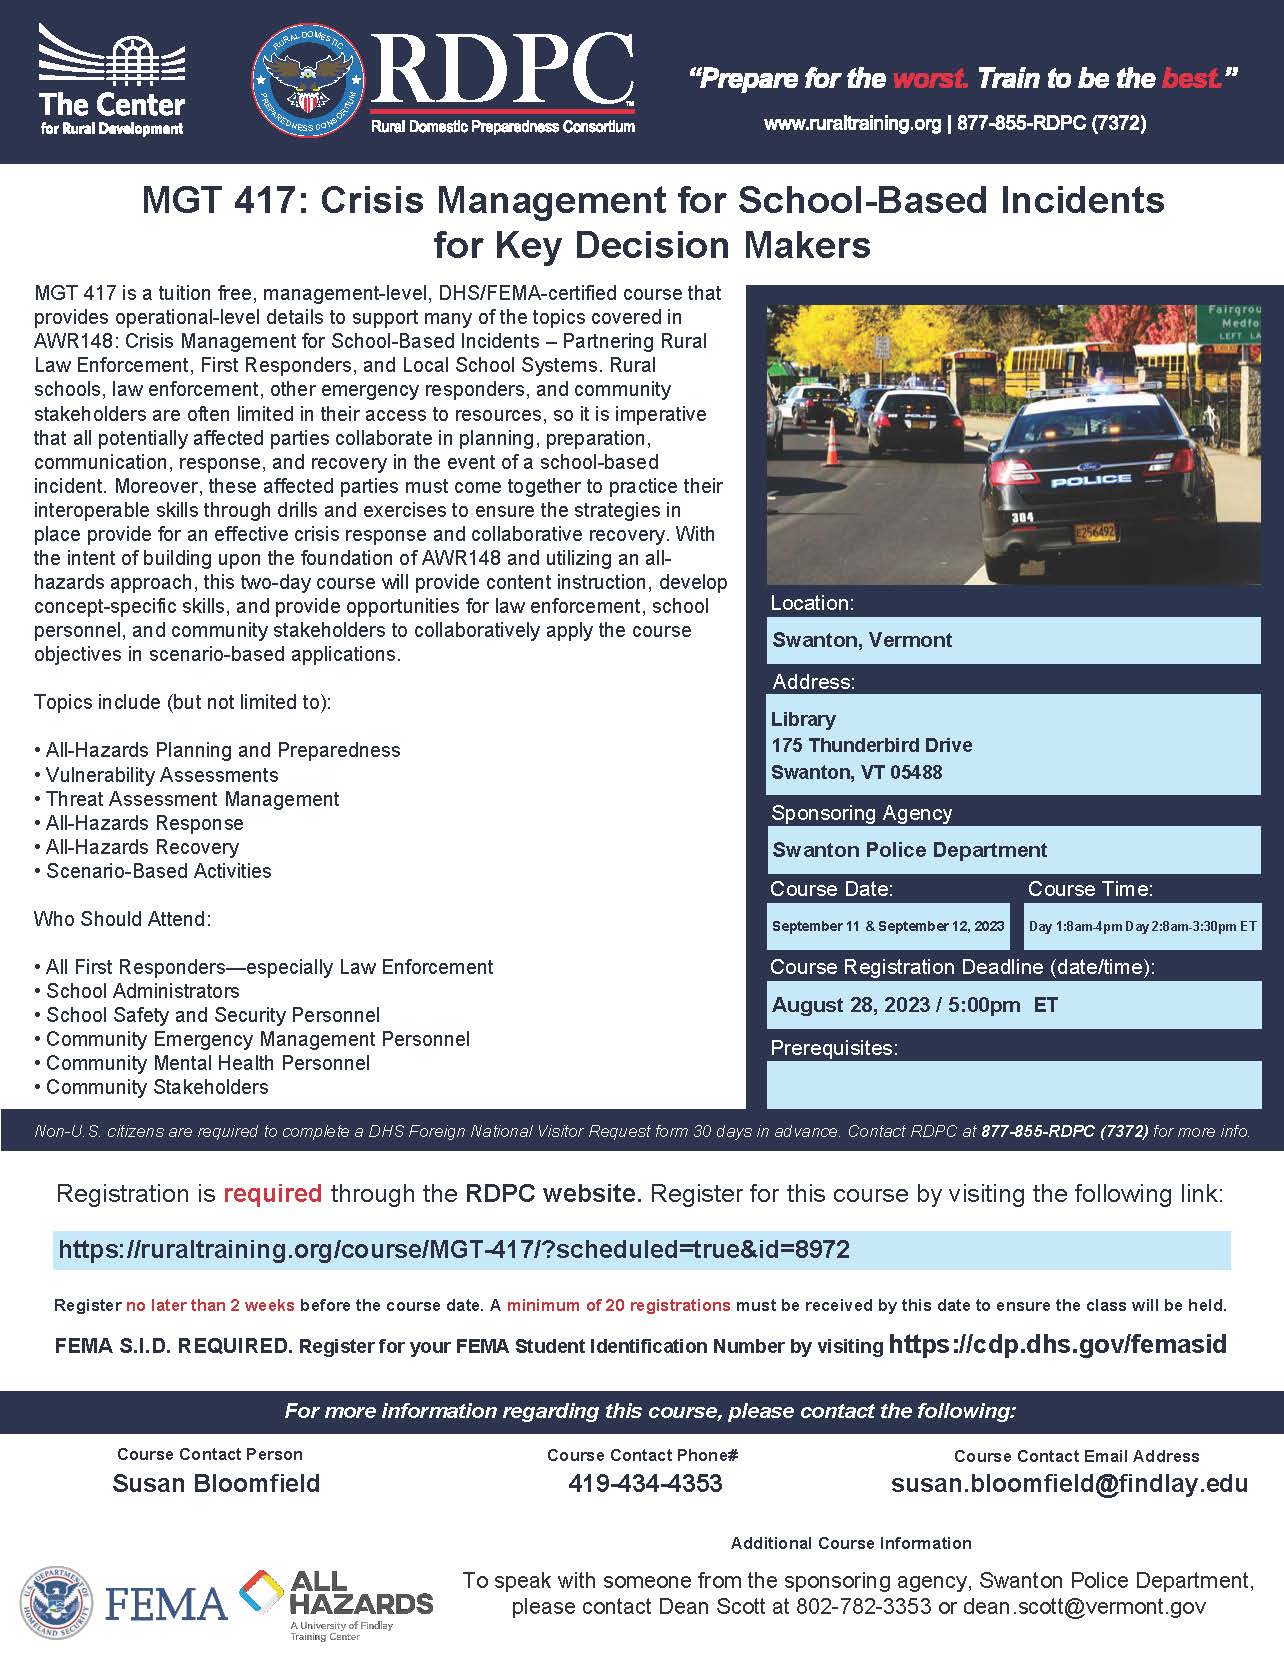 Flyer for MGT 417: Crisis Management For School Based Incidents For Key Decision Makers